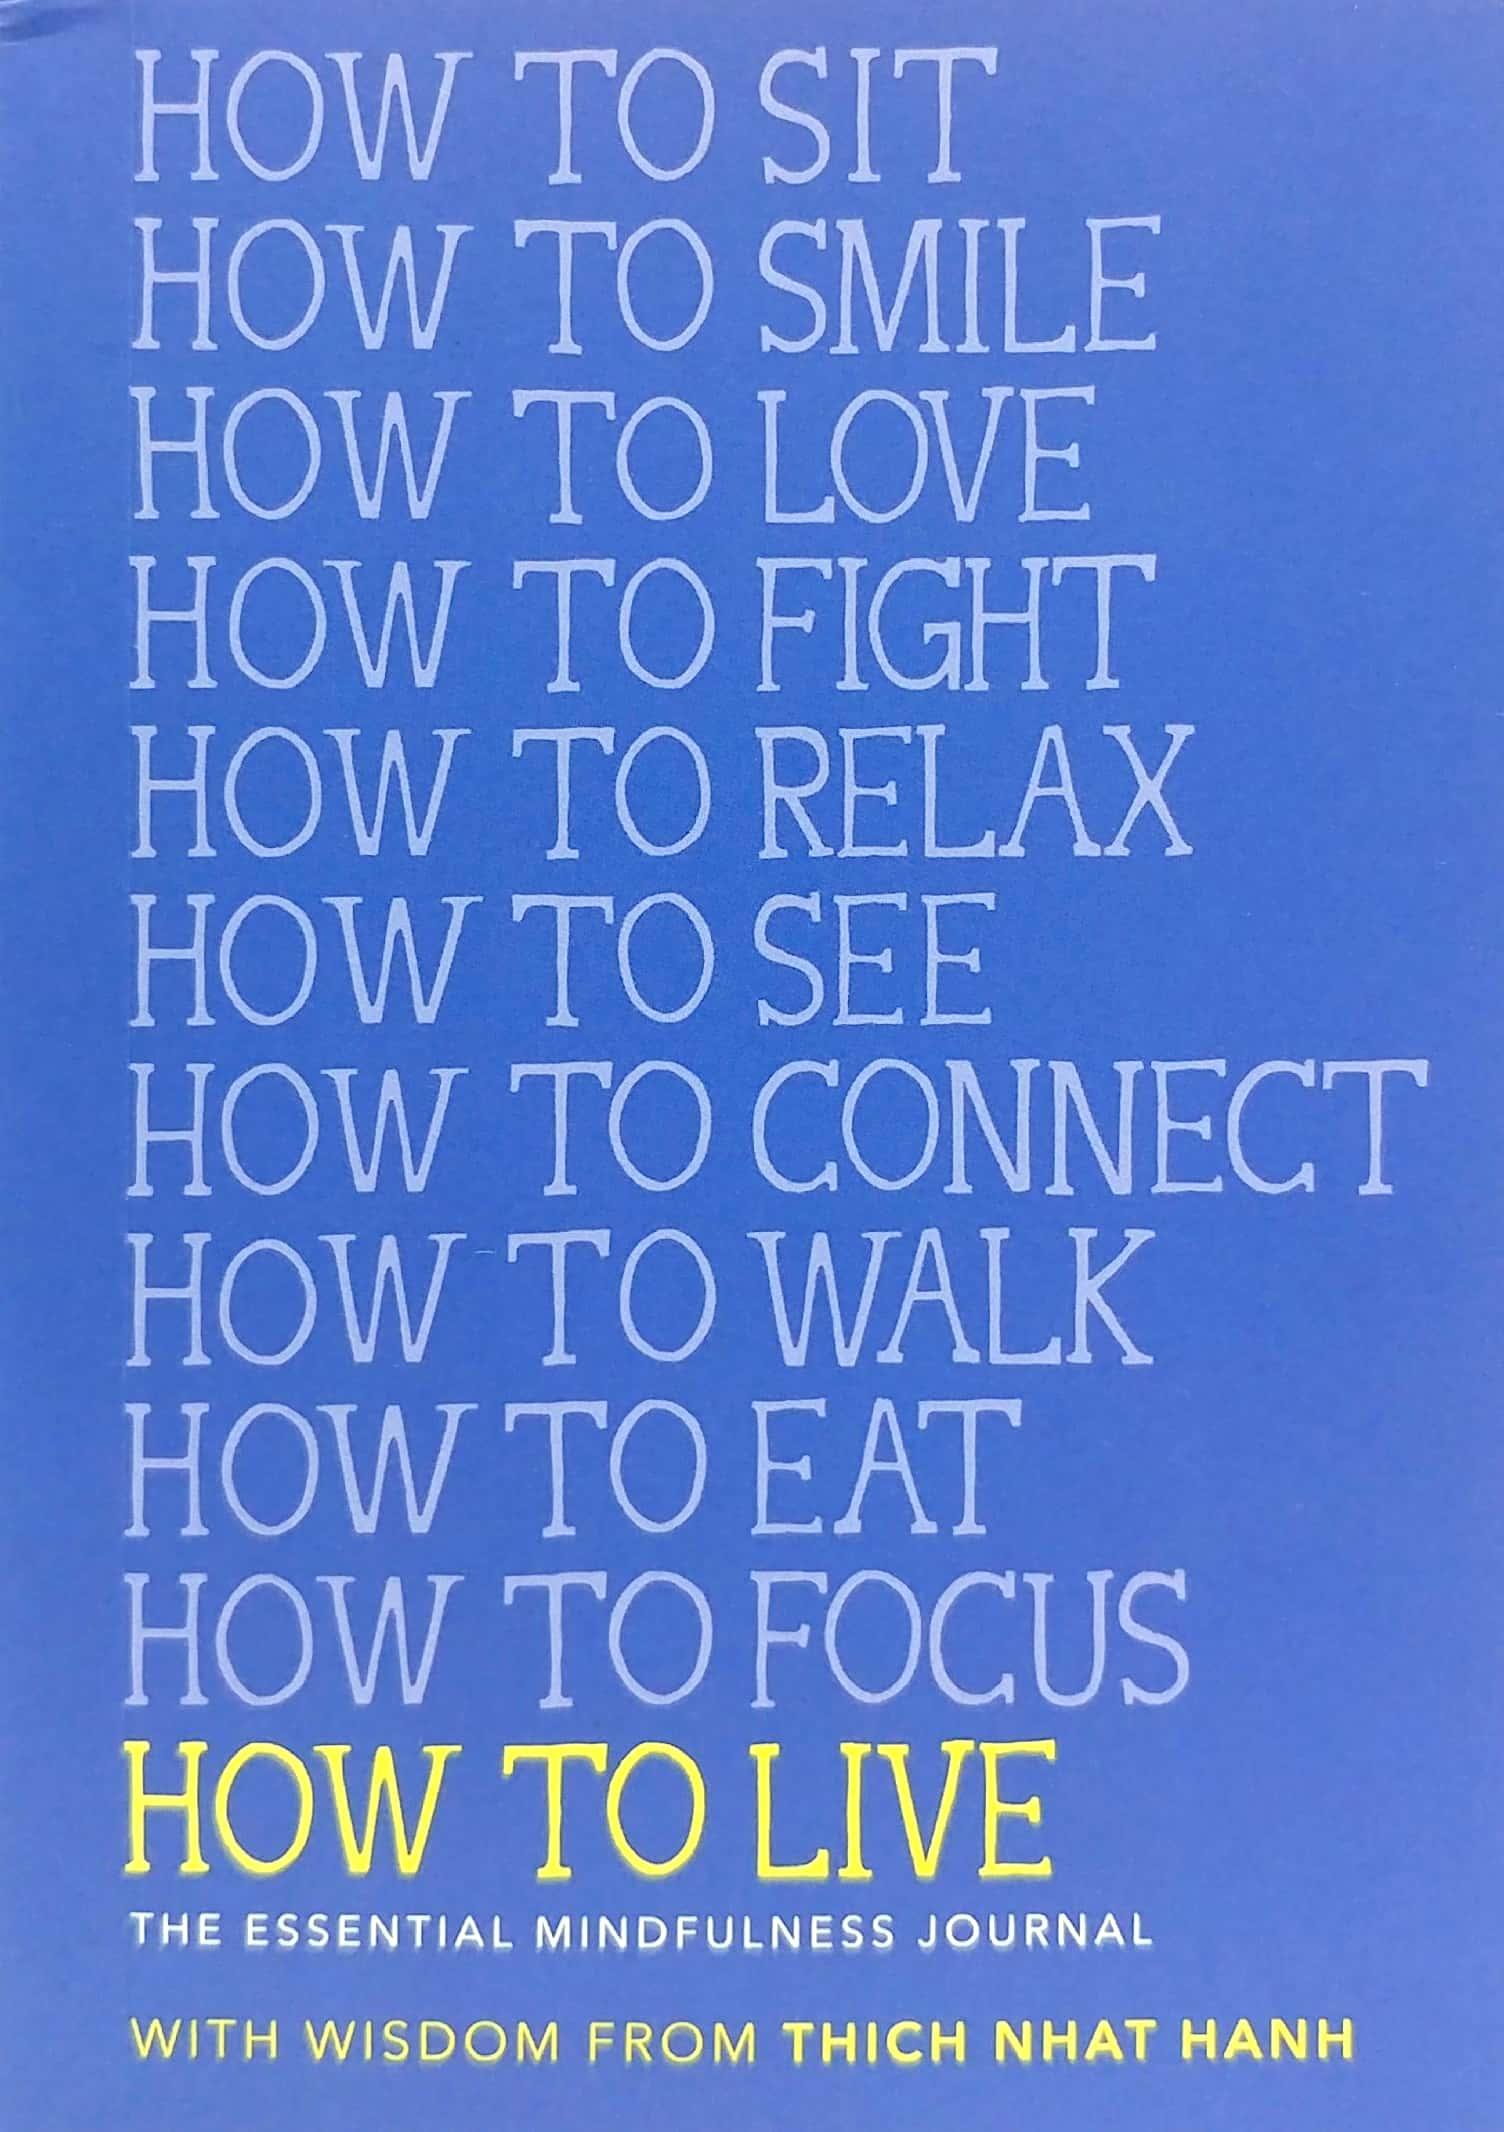 How To Live: The Essential Mindfulness Journal